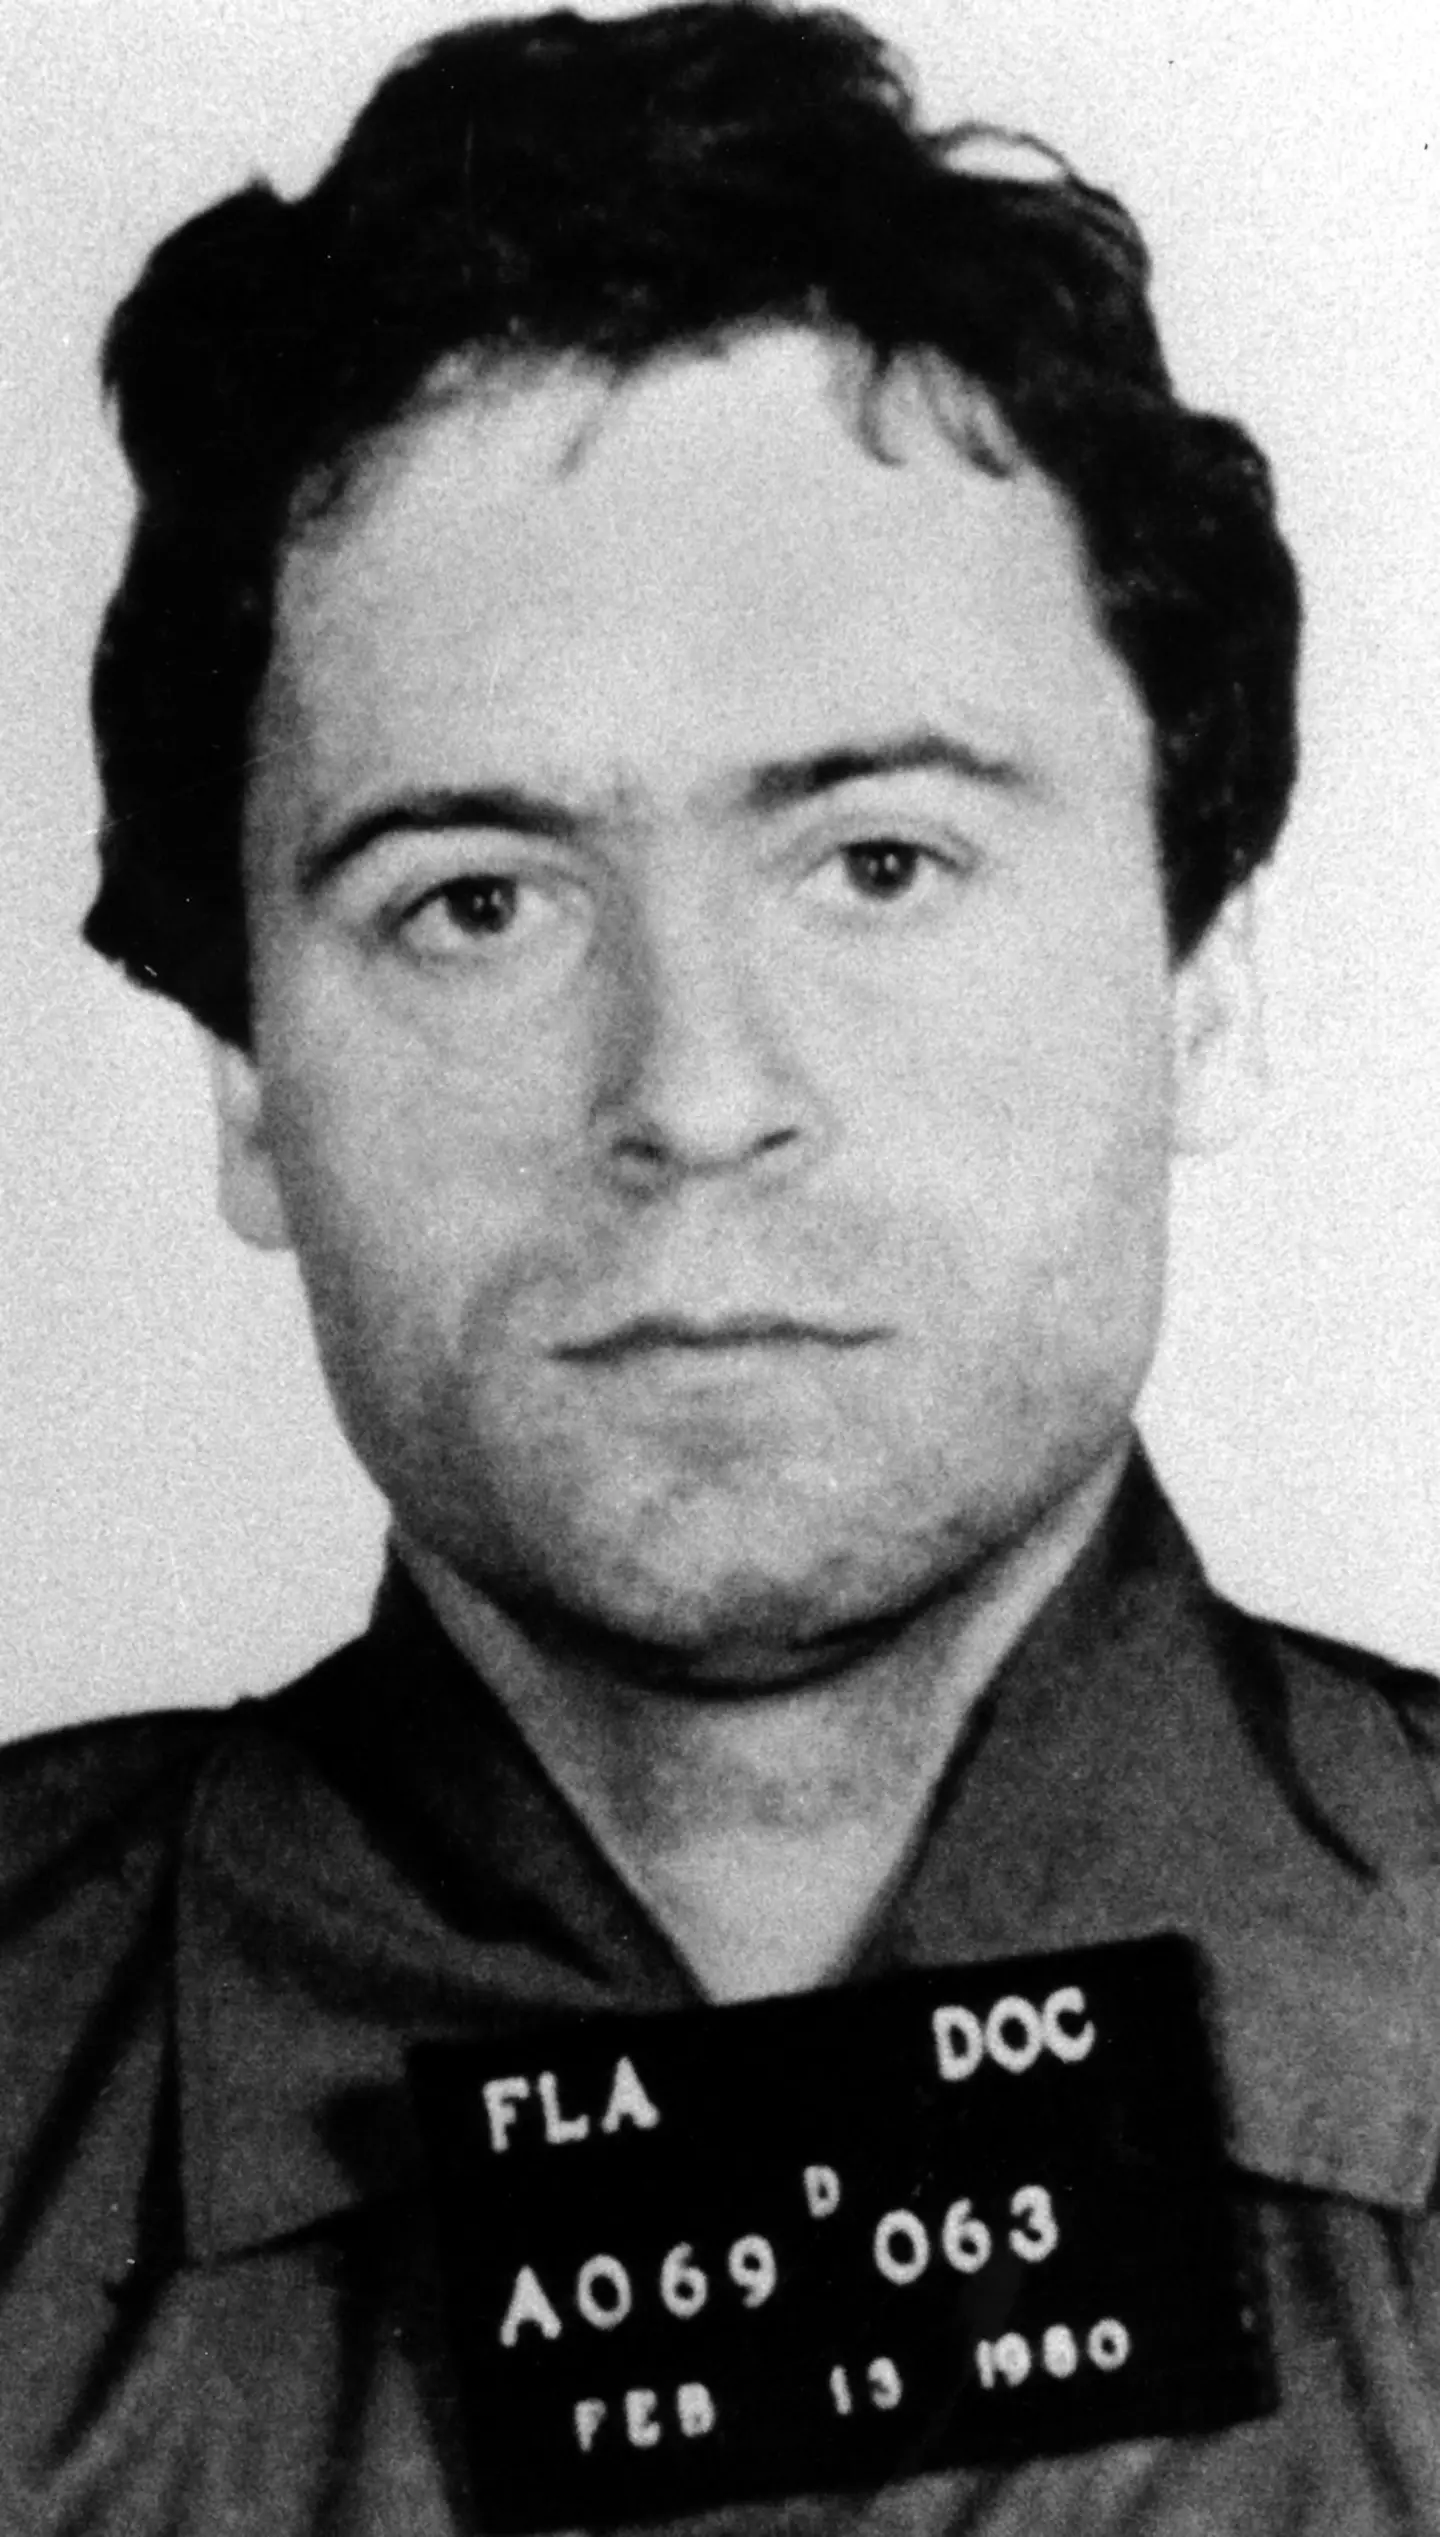 Ted Bundy was one of America's most infamous murderers (